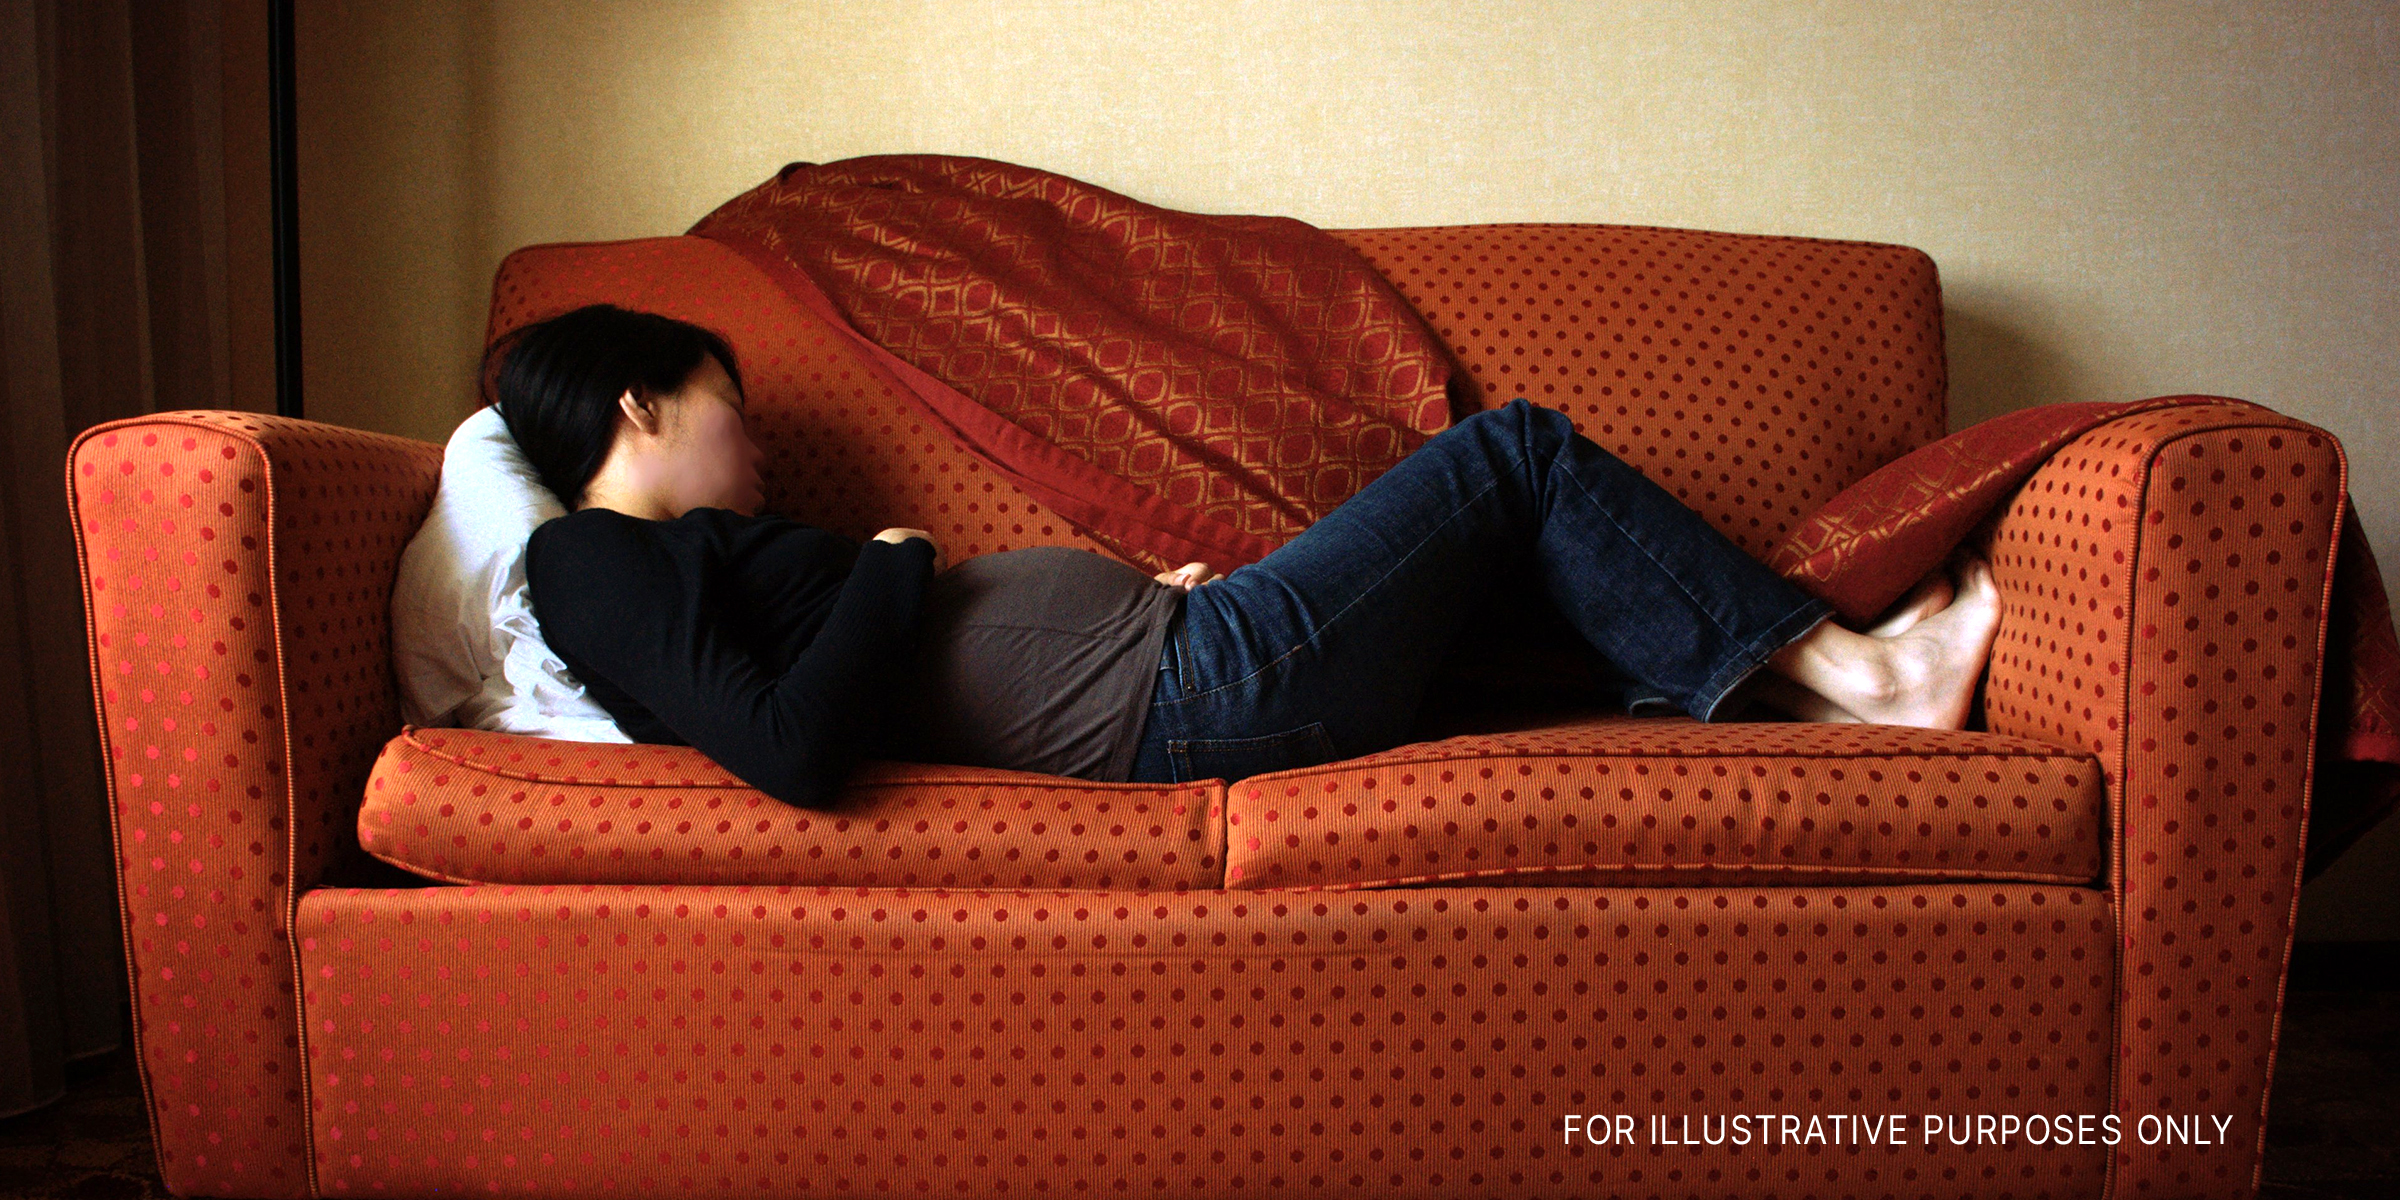 A pregnant woman asleep on the couch | Source: Flickr.com/photos/koadmunkee/